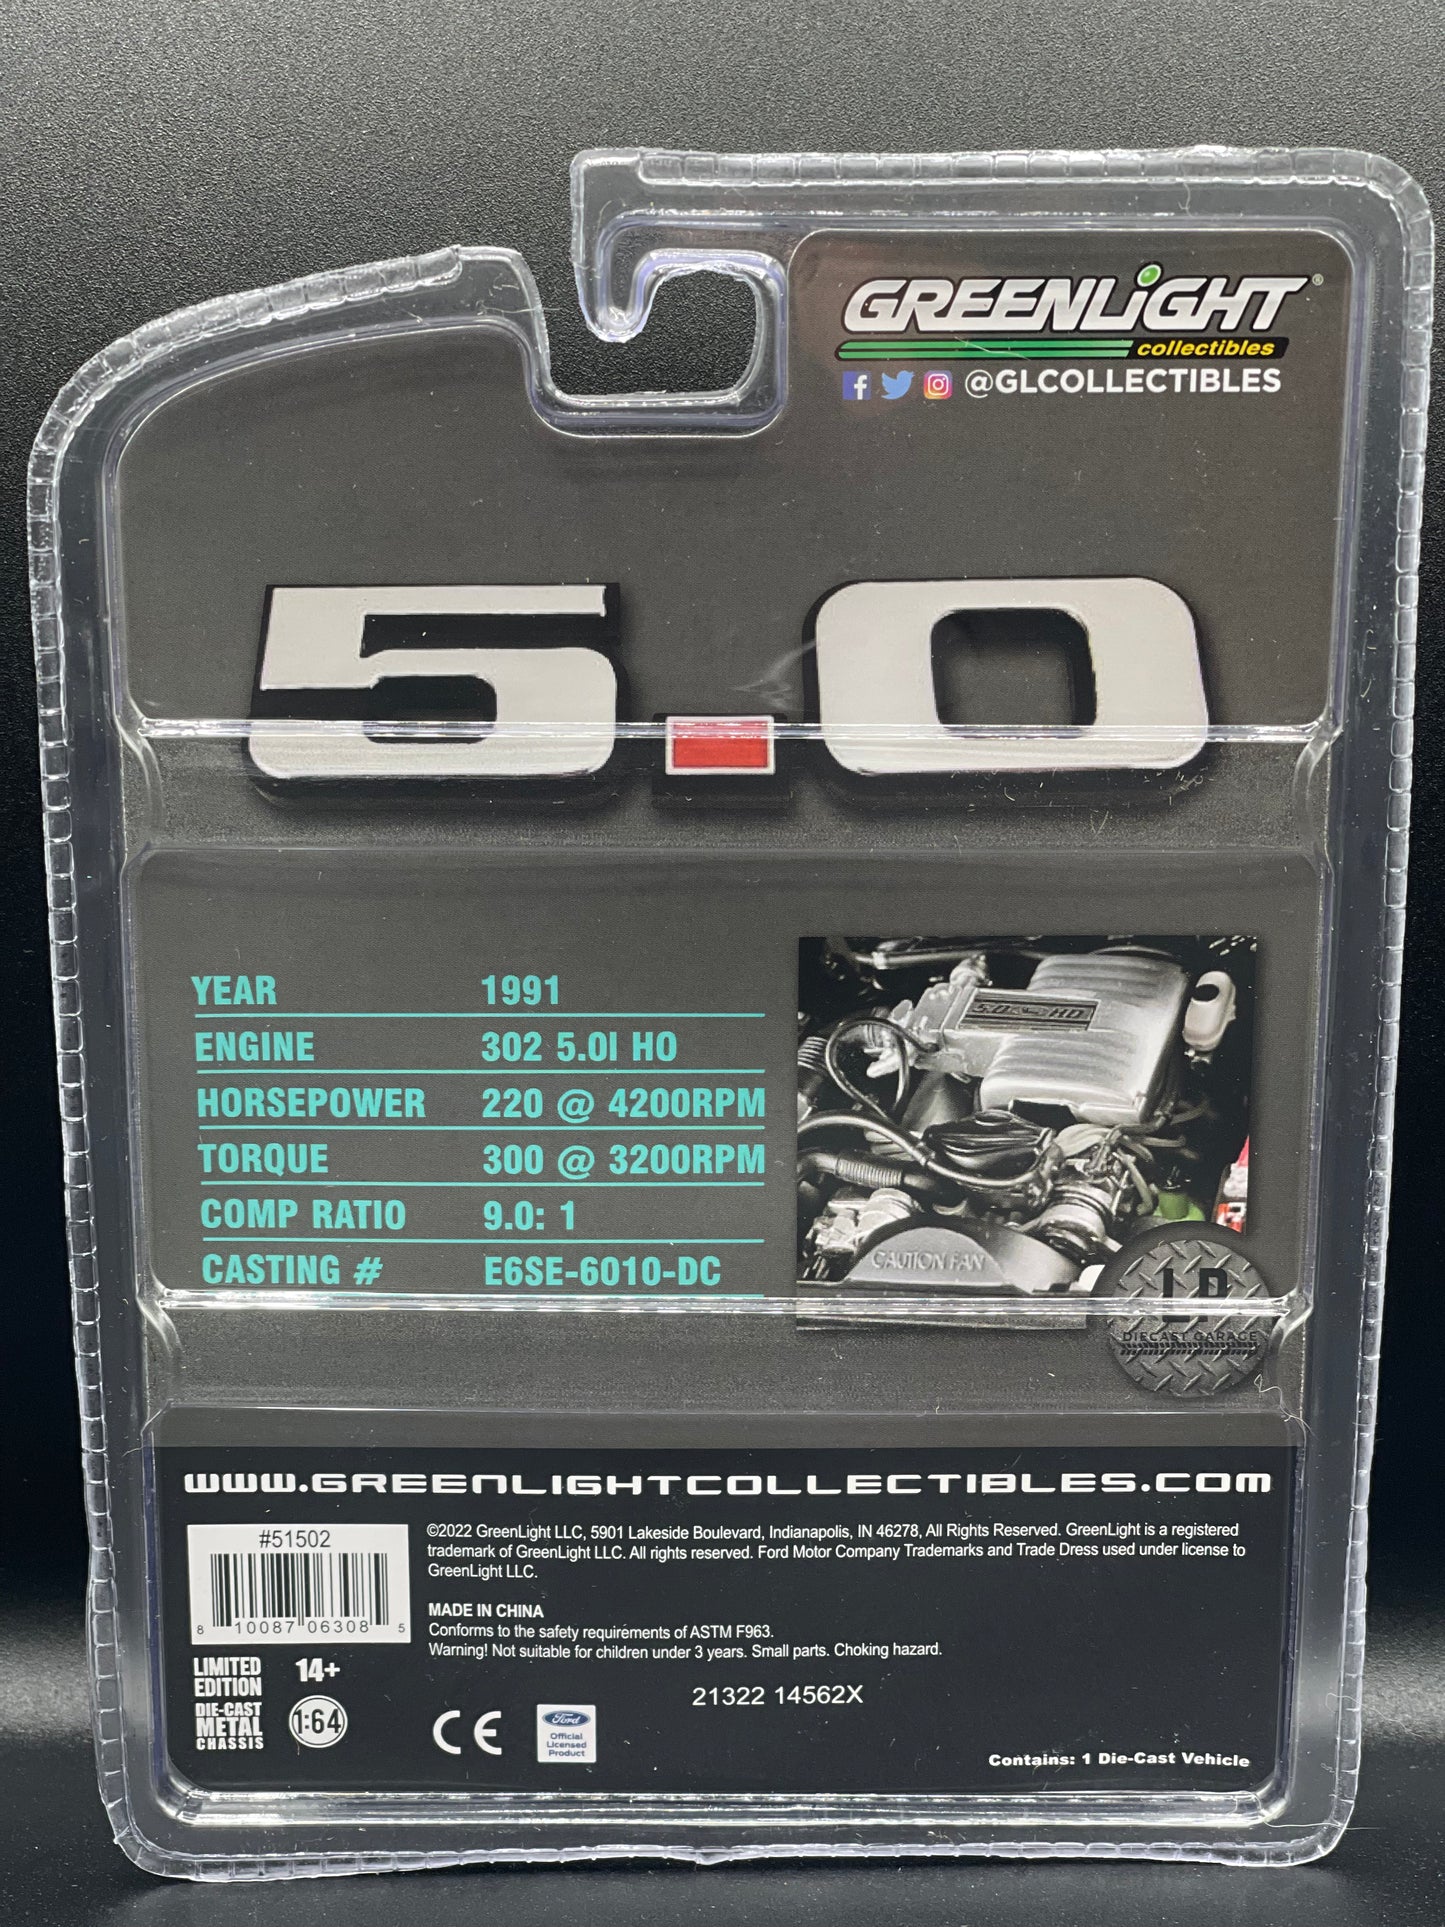 GREENLIGHT 1991 Ford Mustang 5.0 LX Coupe Calypso LP Diecast Garage Exclusive 1st Release 1:64 Diecast Promo *GREEN MACHINE*